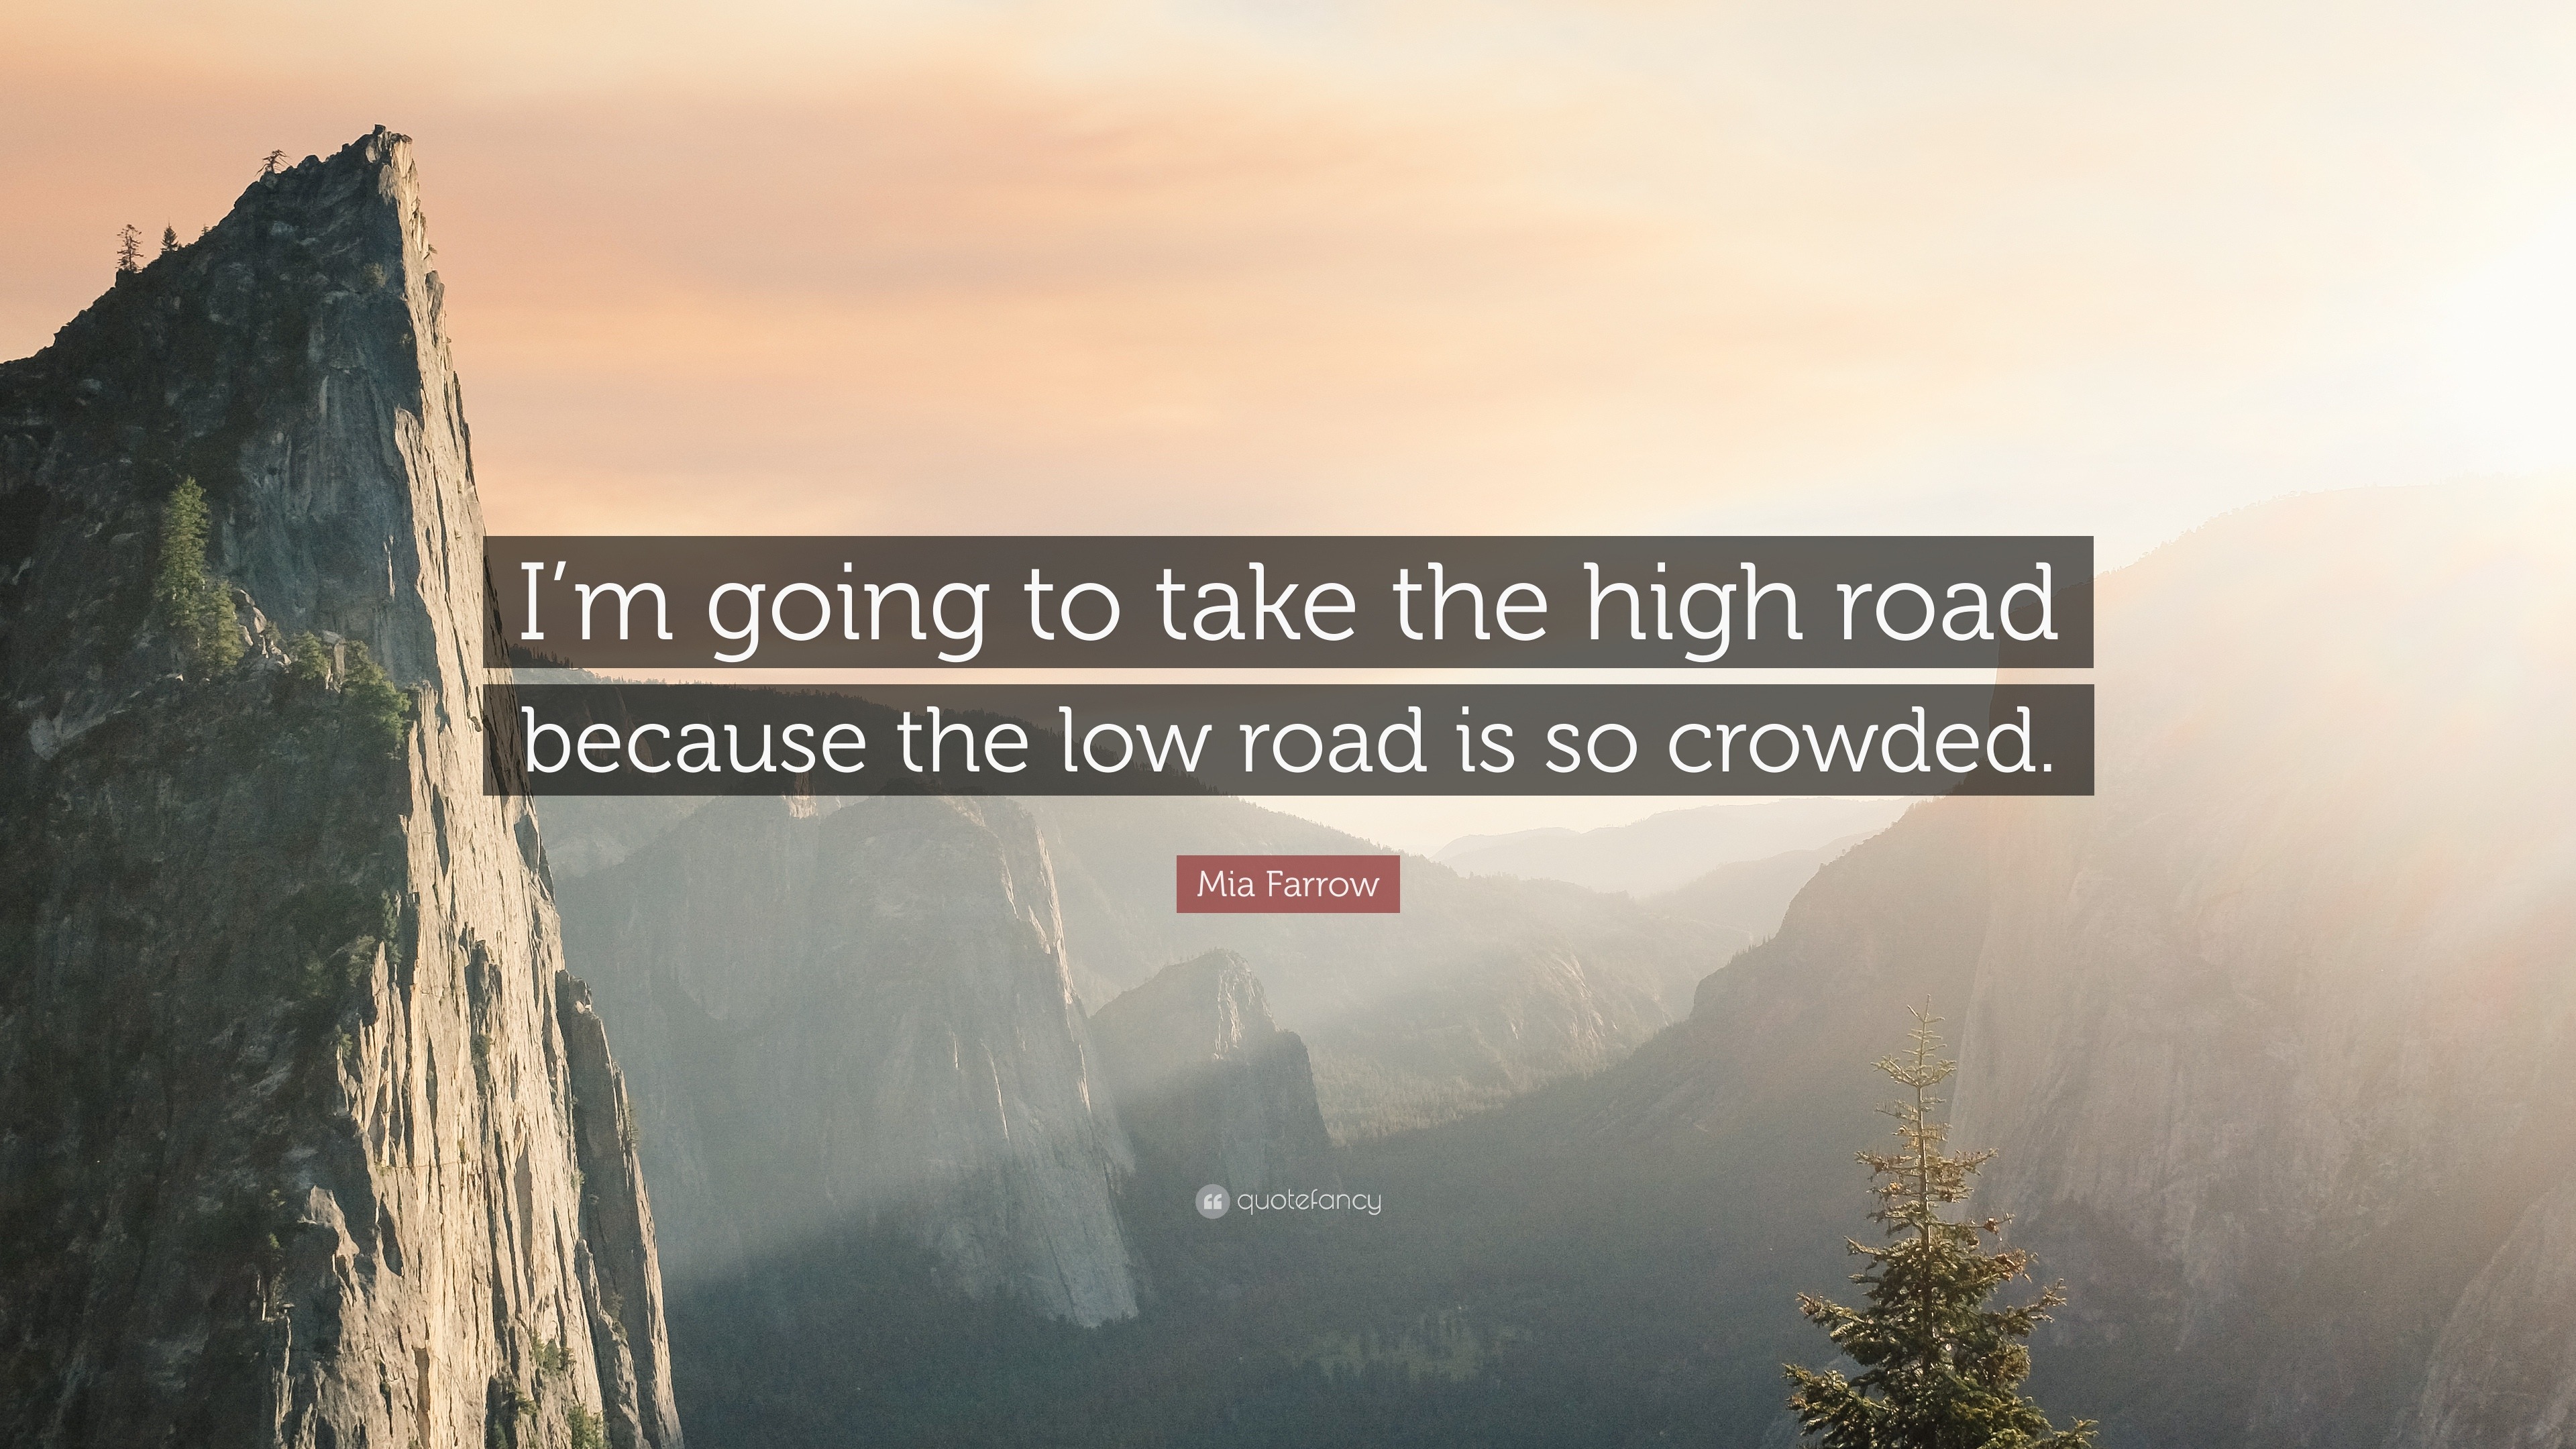 Mia Farrow Quote “I’m going to take the high road because the low road